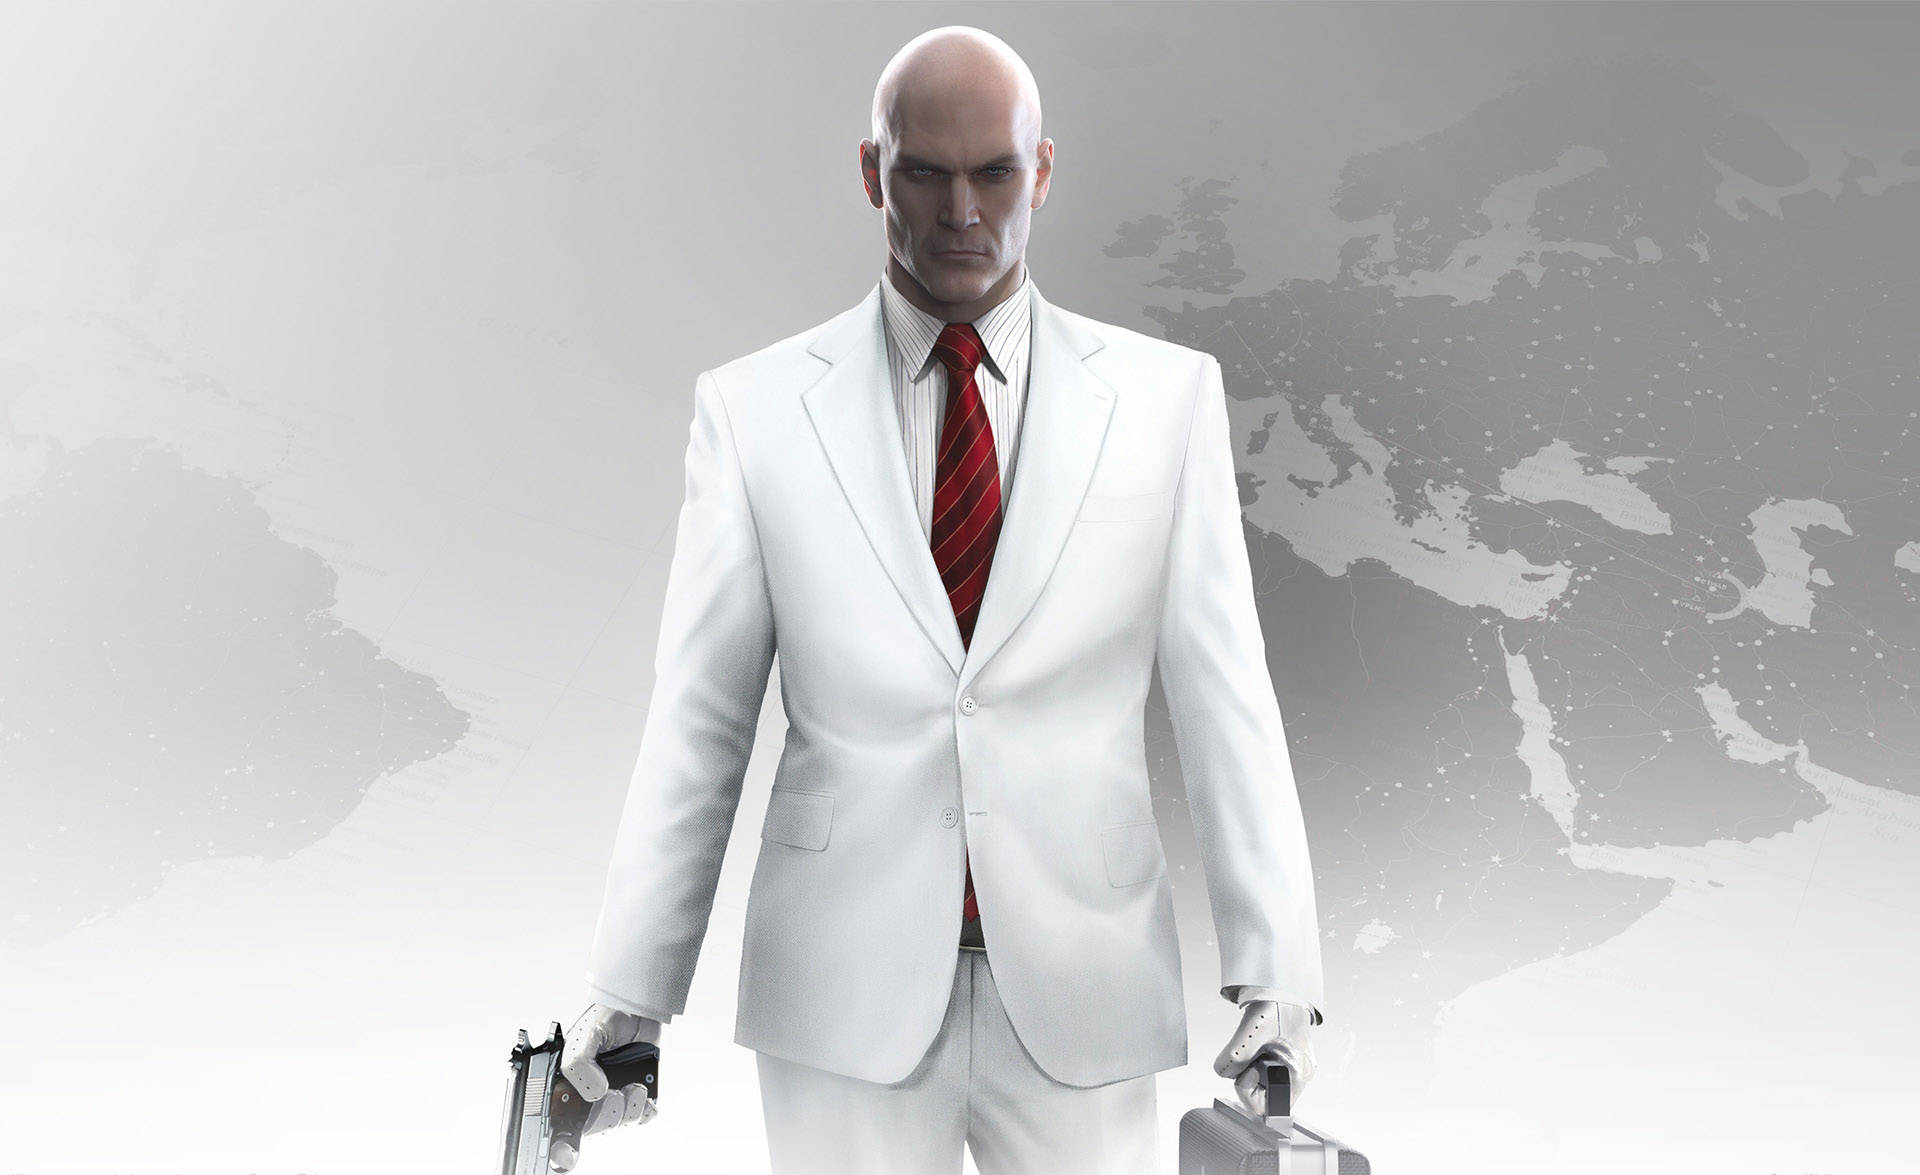 Enter The Shadowy World Of Hitman On Your Iphone